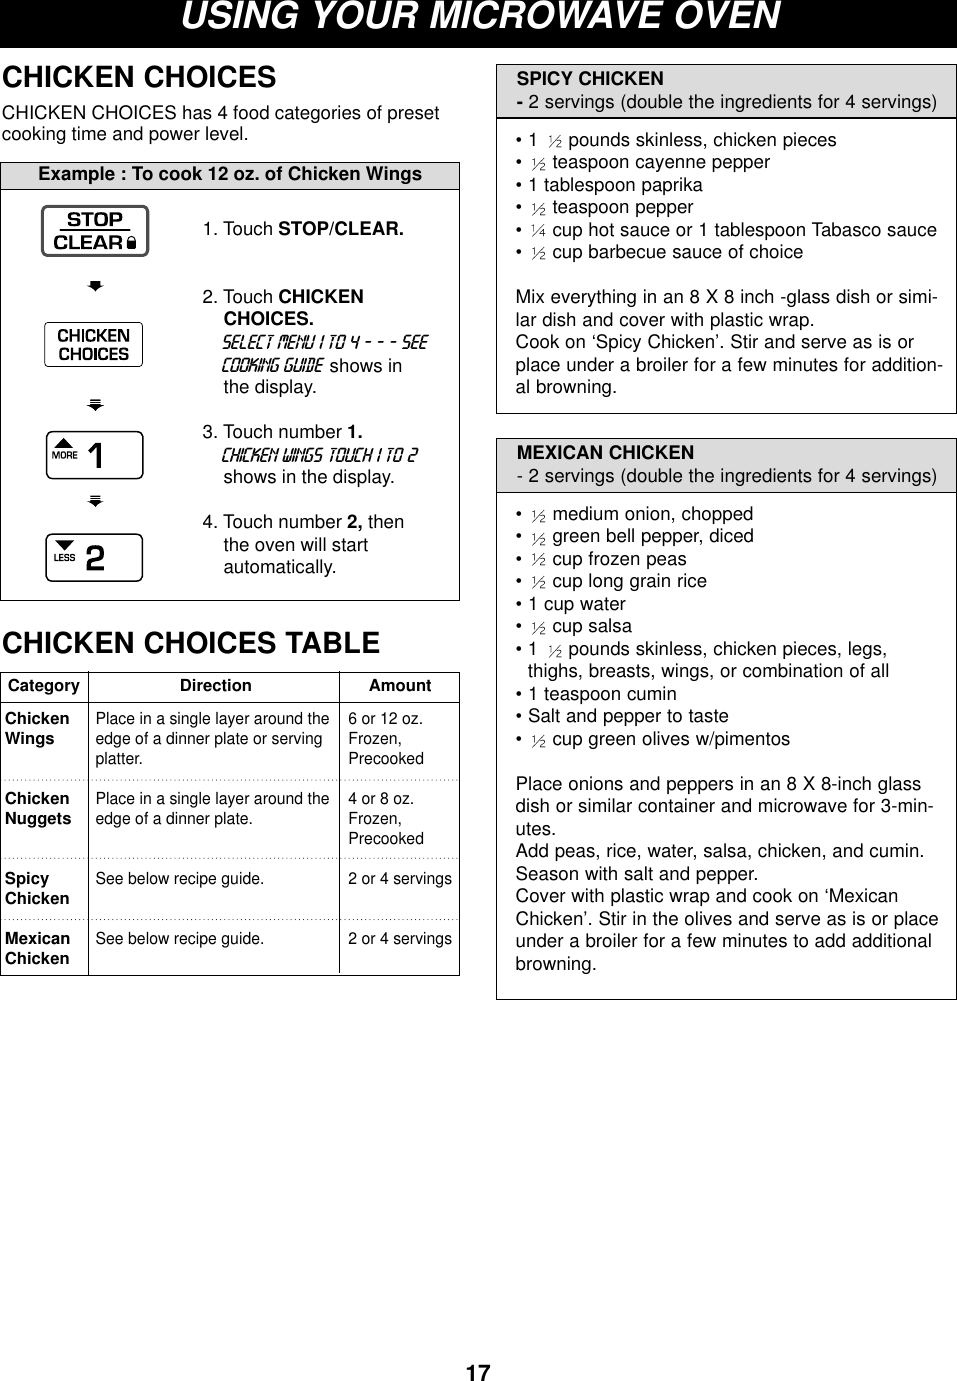 17USING YOUR MICROWAVE OVENCHICKEN CHOICESCHICKEN CHOICES has 4 food categories of presetcooking time and power level.ChickenWingsChickenNuggetsSpicyChickenMexicanChickenPlace in a single layer around theedge of a dinner plate or servingplatter.Place in a single layer around theedge of a dinner plate.See below recipe guide.See below recipe guide.6 or 12 oz.Frozen,Precooked4 or 8 oz.Frozen,Precooked2 or 4 servings 2 or 4 servingsAmountCategory DirectionSPICY CHICKEN- 2 servings (double the ingredients for 4 servings)• 1  pounds skinless, chicken pieces• teaspoon cayenne pepper• 1 tablespoon paprika• teaspoon pepper• cup hot sauce or 1 tablespoon Tabasco sauce• cup barbecue sauce of choiceMix everything in an 8 X 8 inch -glass dish or simi-lar dish and cover with plastic wrap.Cook on ‘Spicy Chicken’. Stir and serve as is orplace under a broiler for a few minutes for addition-al browning.MEXICAN CHICKEN- 2 servings (double the ingredients for 4 servings)• medium onion, chopped• green bell pepper, diced• cup frozen peas• cup long grain rice• 1 cup water• cup salsa• 1  pounds skinless, chicken pieces, legs,thighs, breasts, wings, or combination of all• 1 teaspoon cumin• Salt and pepper to taste• cup green olives w/pimentosPlace onions and peppers in an 8 X 8-inch glassdish or similar container and microwave for 3-min-utes. Add peas, rice, water, salsa, chicken, and cumin. Season with salt and pepper. Cover with plastic wrap and cook on ‘MexicanChicken’. Stir in the olives and serve as is or placeunder a broiler for a few minutes to add additionalbrowning. Example : To cook 12 oz. of Chicken Wings1. Touch STOP/CLEAR.2. Touch CHICKENCHOICES.select menu 1 to 4 - - - seecooking guide shows inthe display.3. Touch number 1.chicken wings touch 1 to 2 shows in the display.4. Touch number 2, thenthe oven will startautomatically.CHICKEN CHOICES TABLE